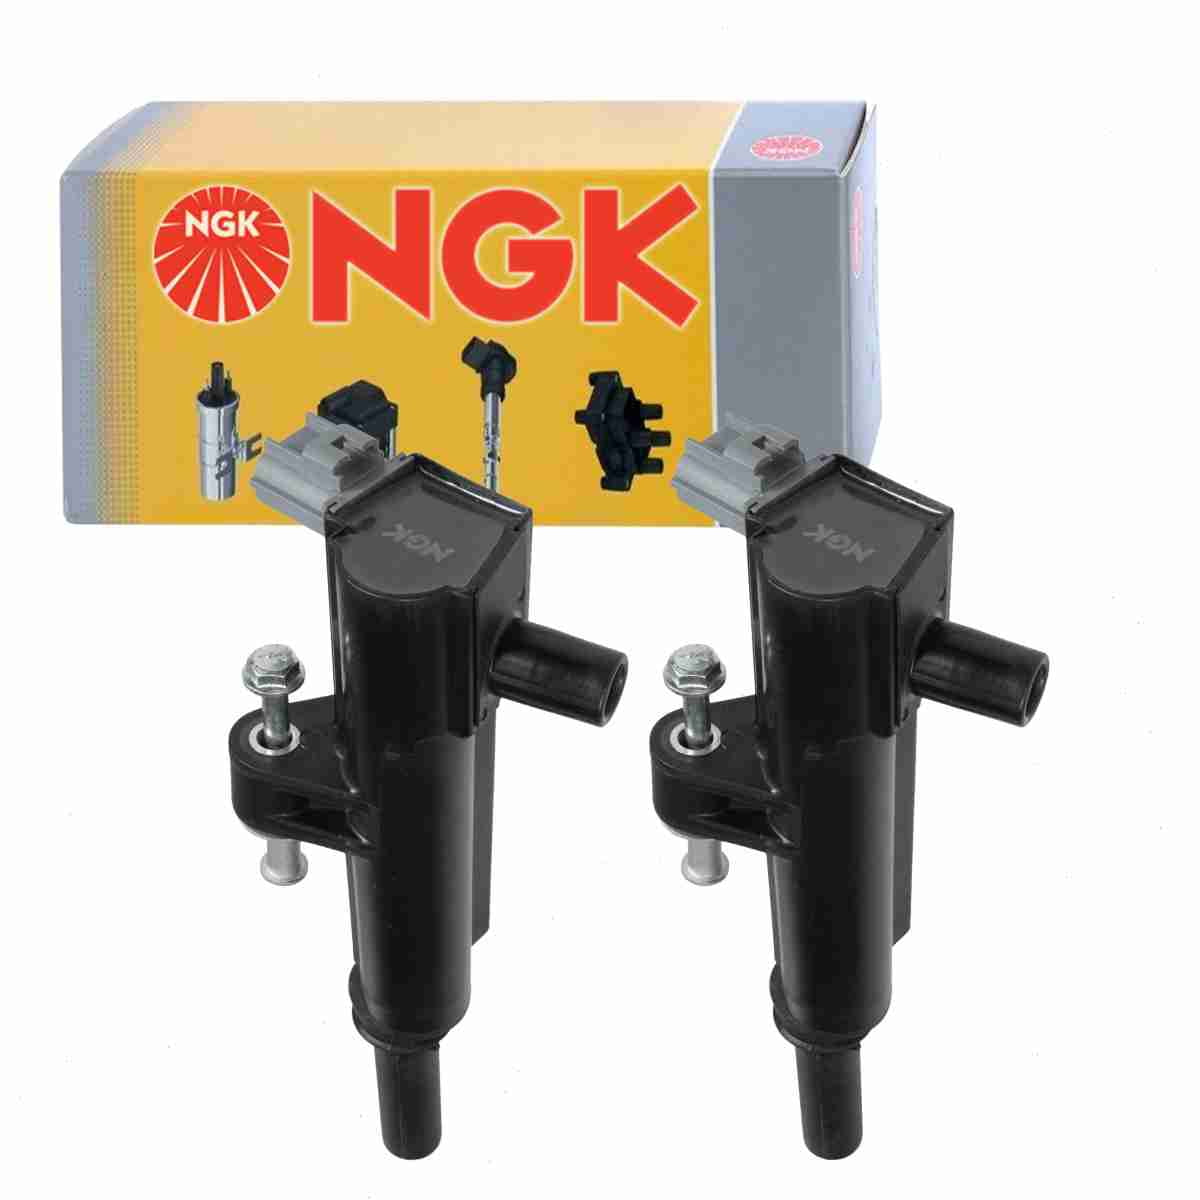 NGK Ignition Coil Boot, 2-pk